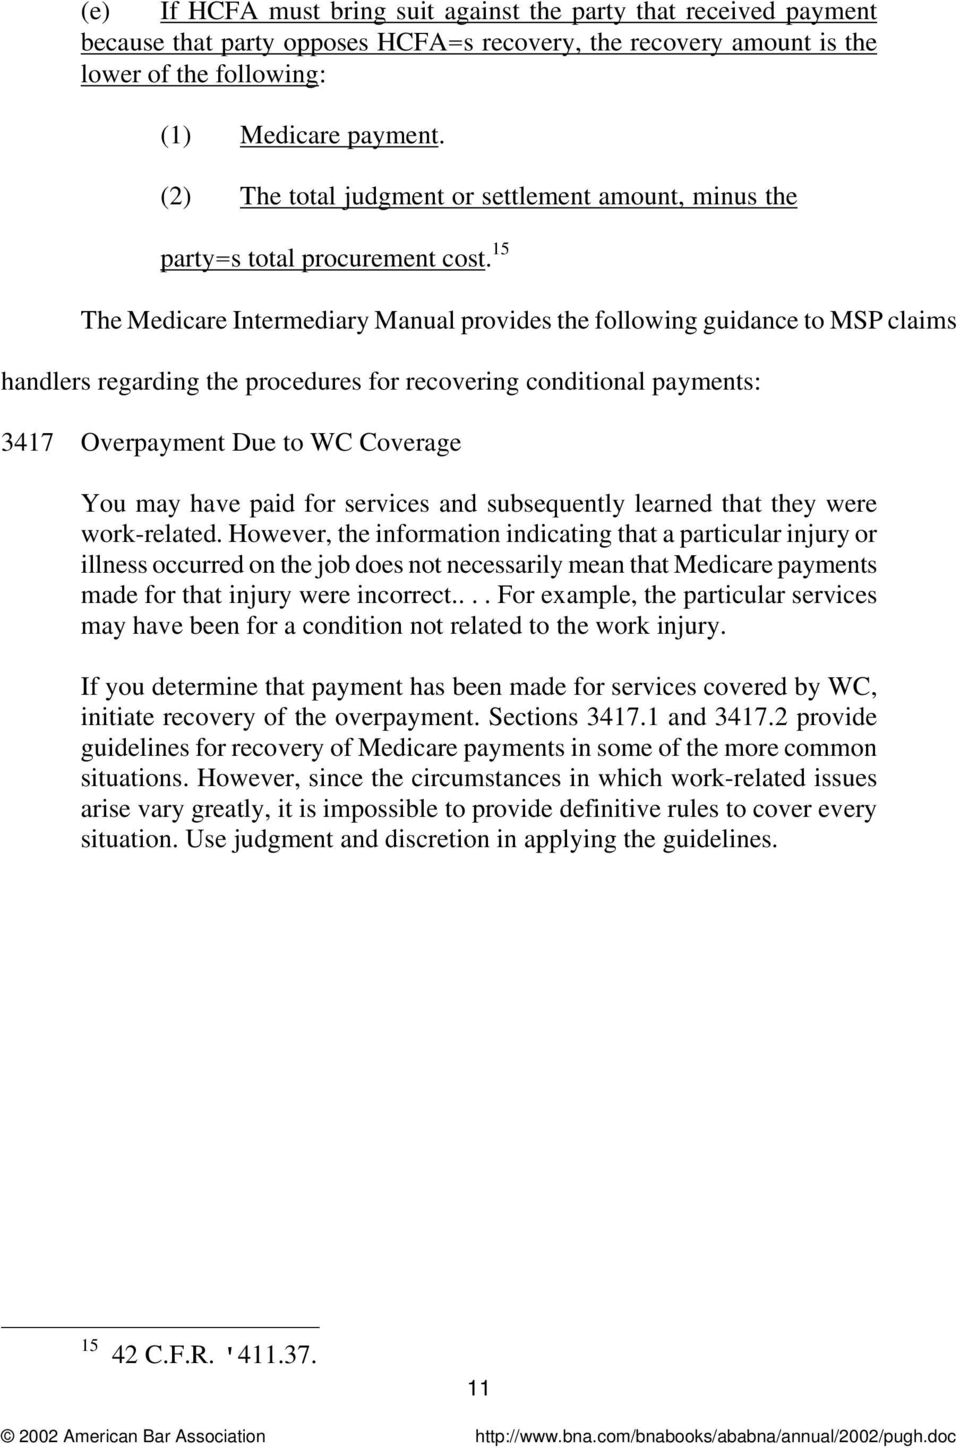 15 The Medicare Intermediary Manual provides the following guidance to MSP claims handlers regarding the procedures for recovering conditional payments: 3417 Overpayment Due to WC Coverage You may